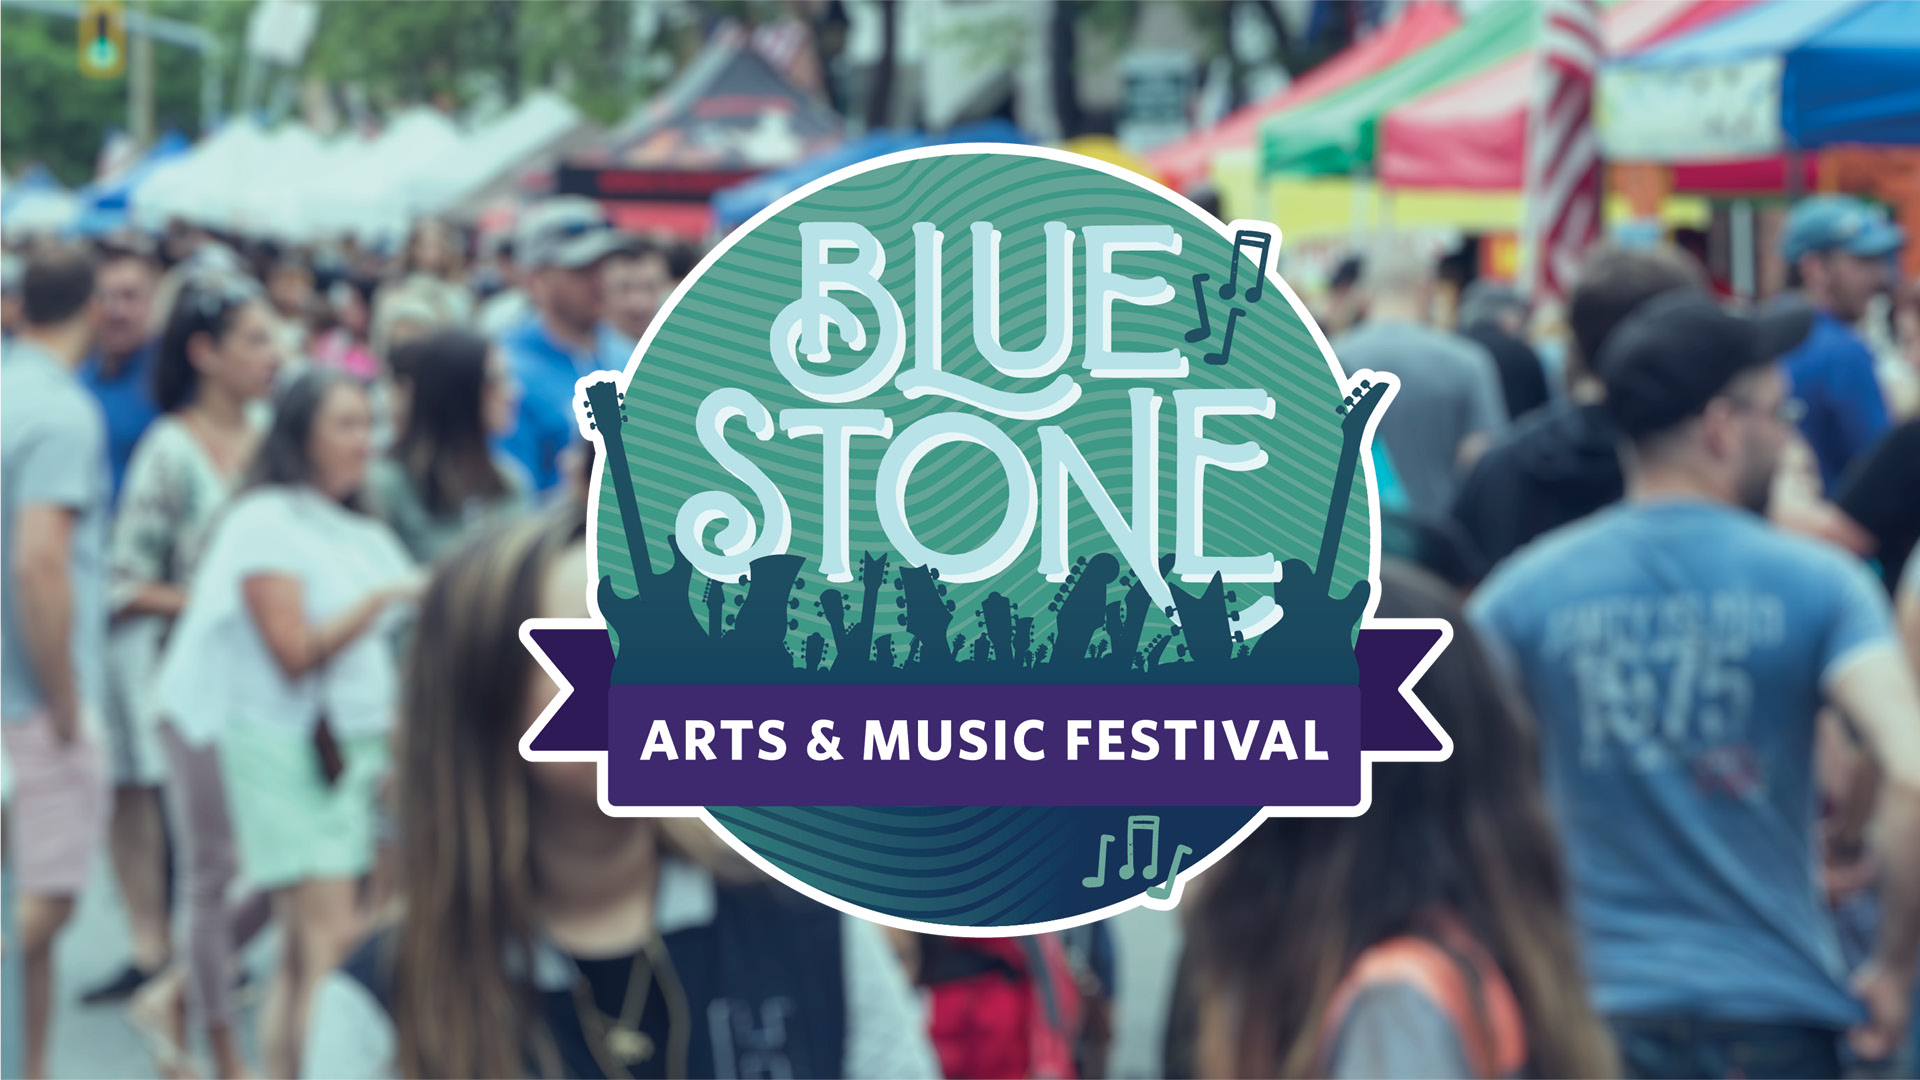 Blue Stone Festival logo on top of image of people at a festival